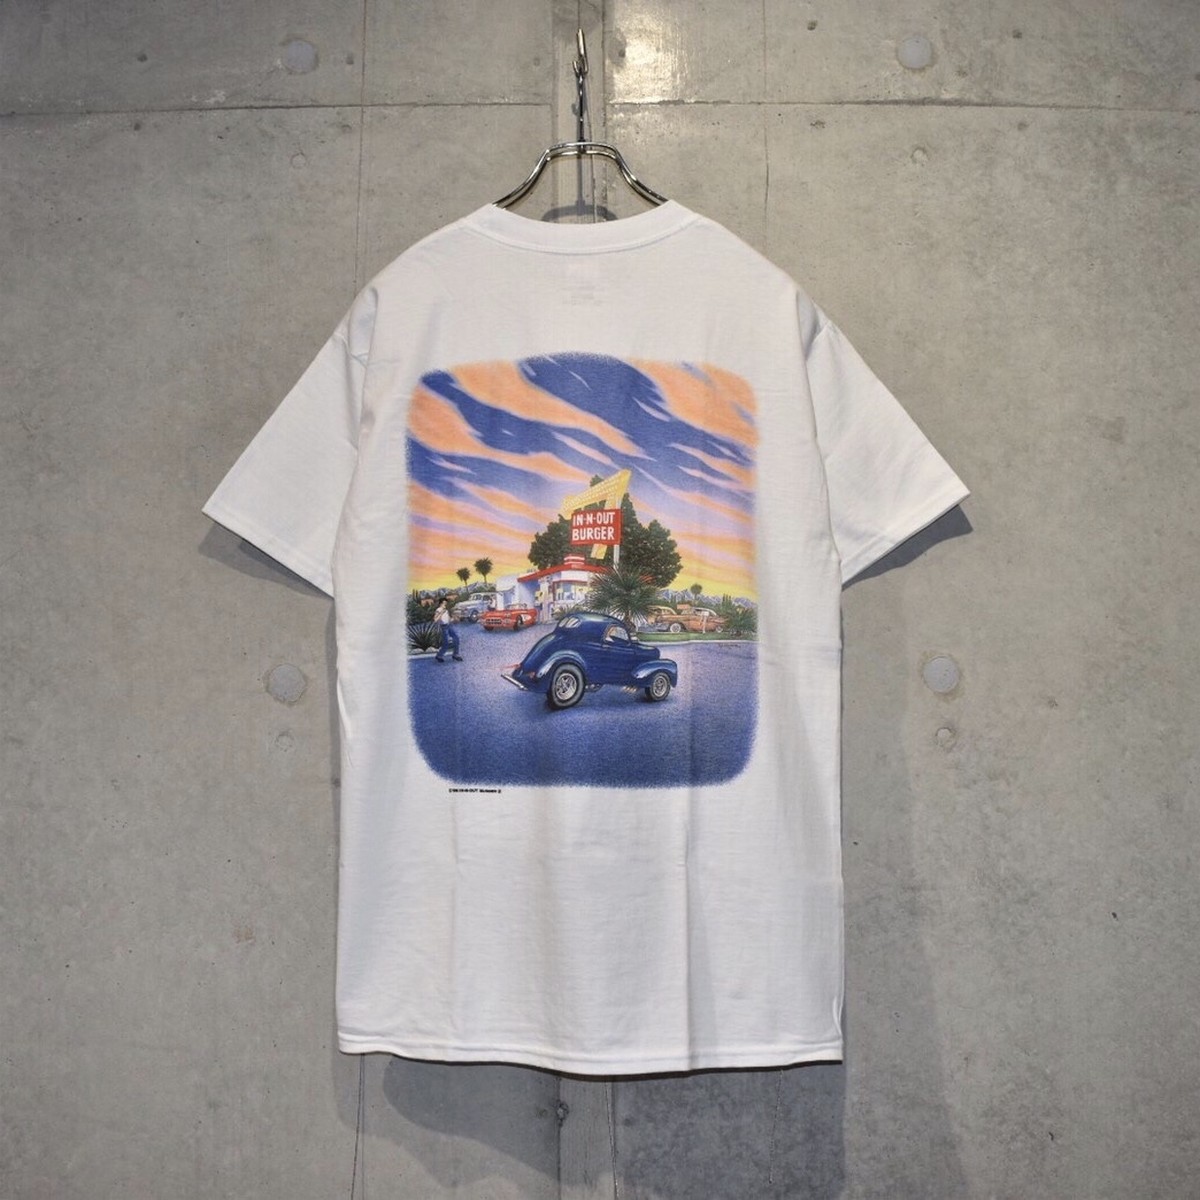 IN-N-OUT BURGER 1996 T-SHIRT / WHITE | MFC STORE